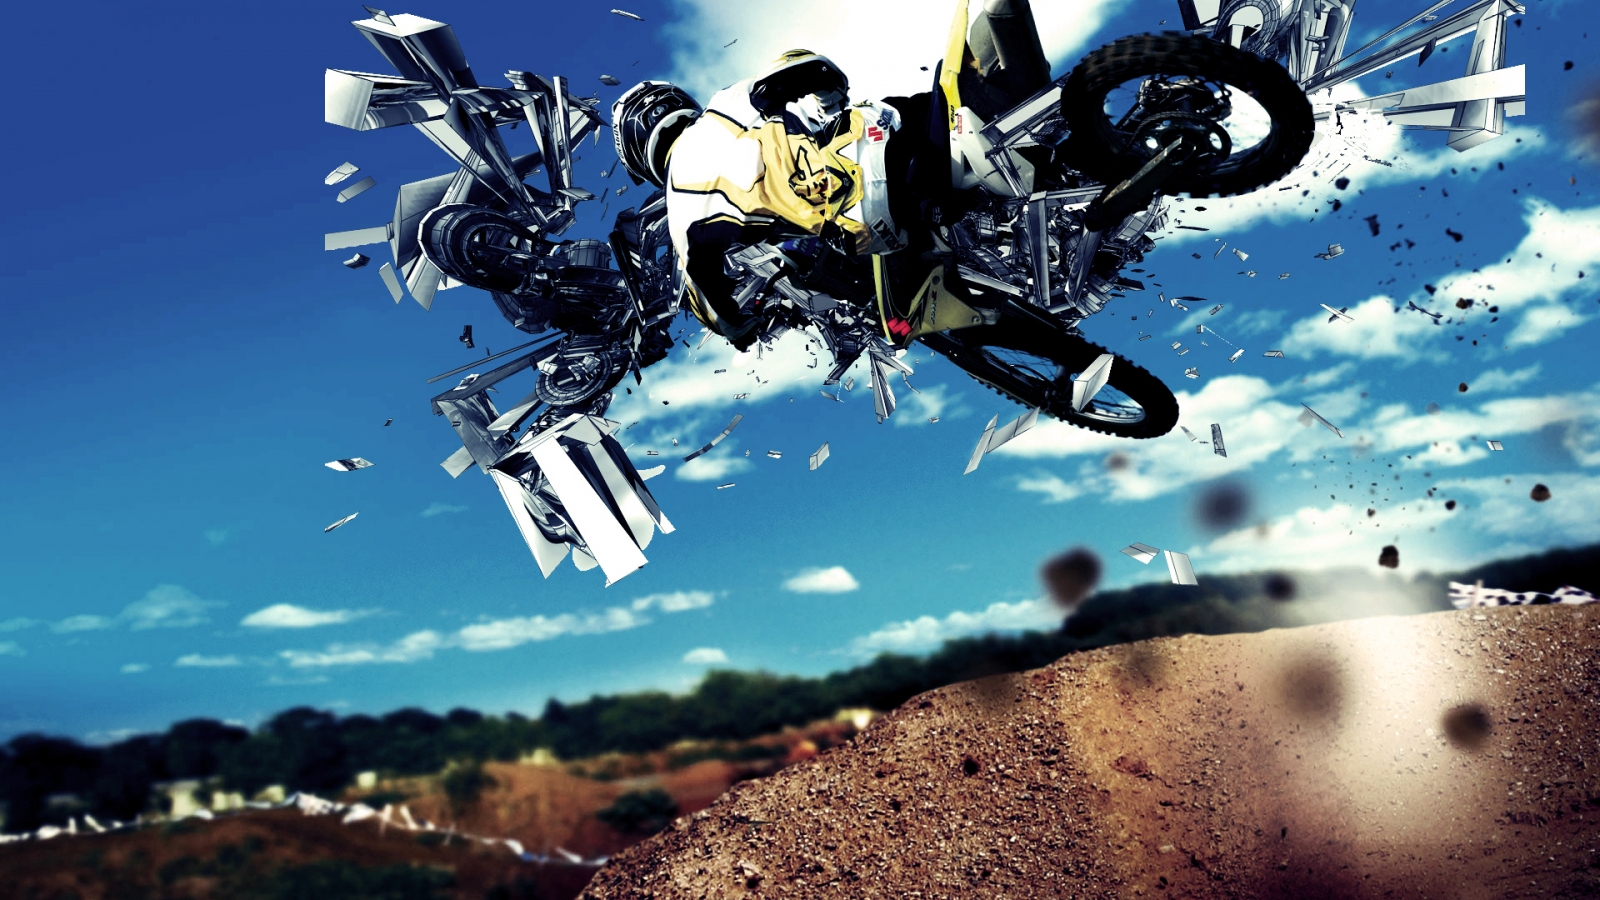 Motorcycle Race for 1600 x 900 HDTV resolution